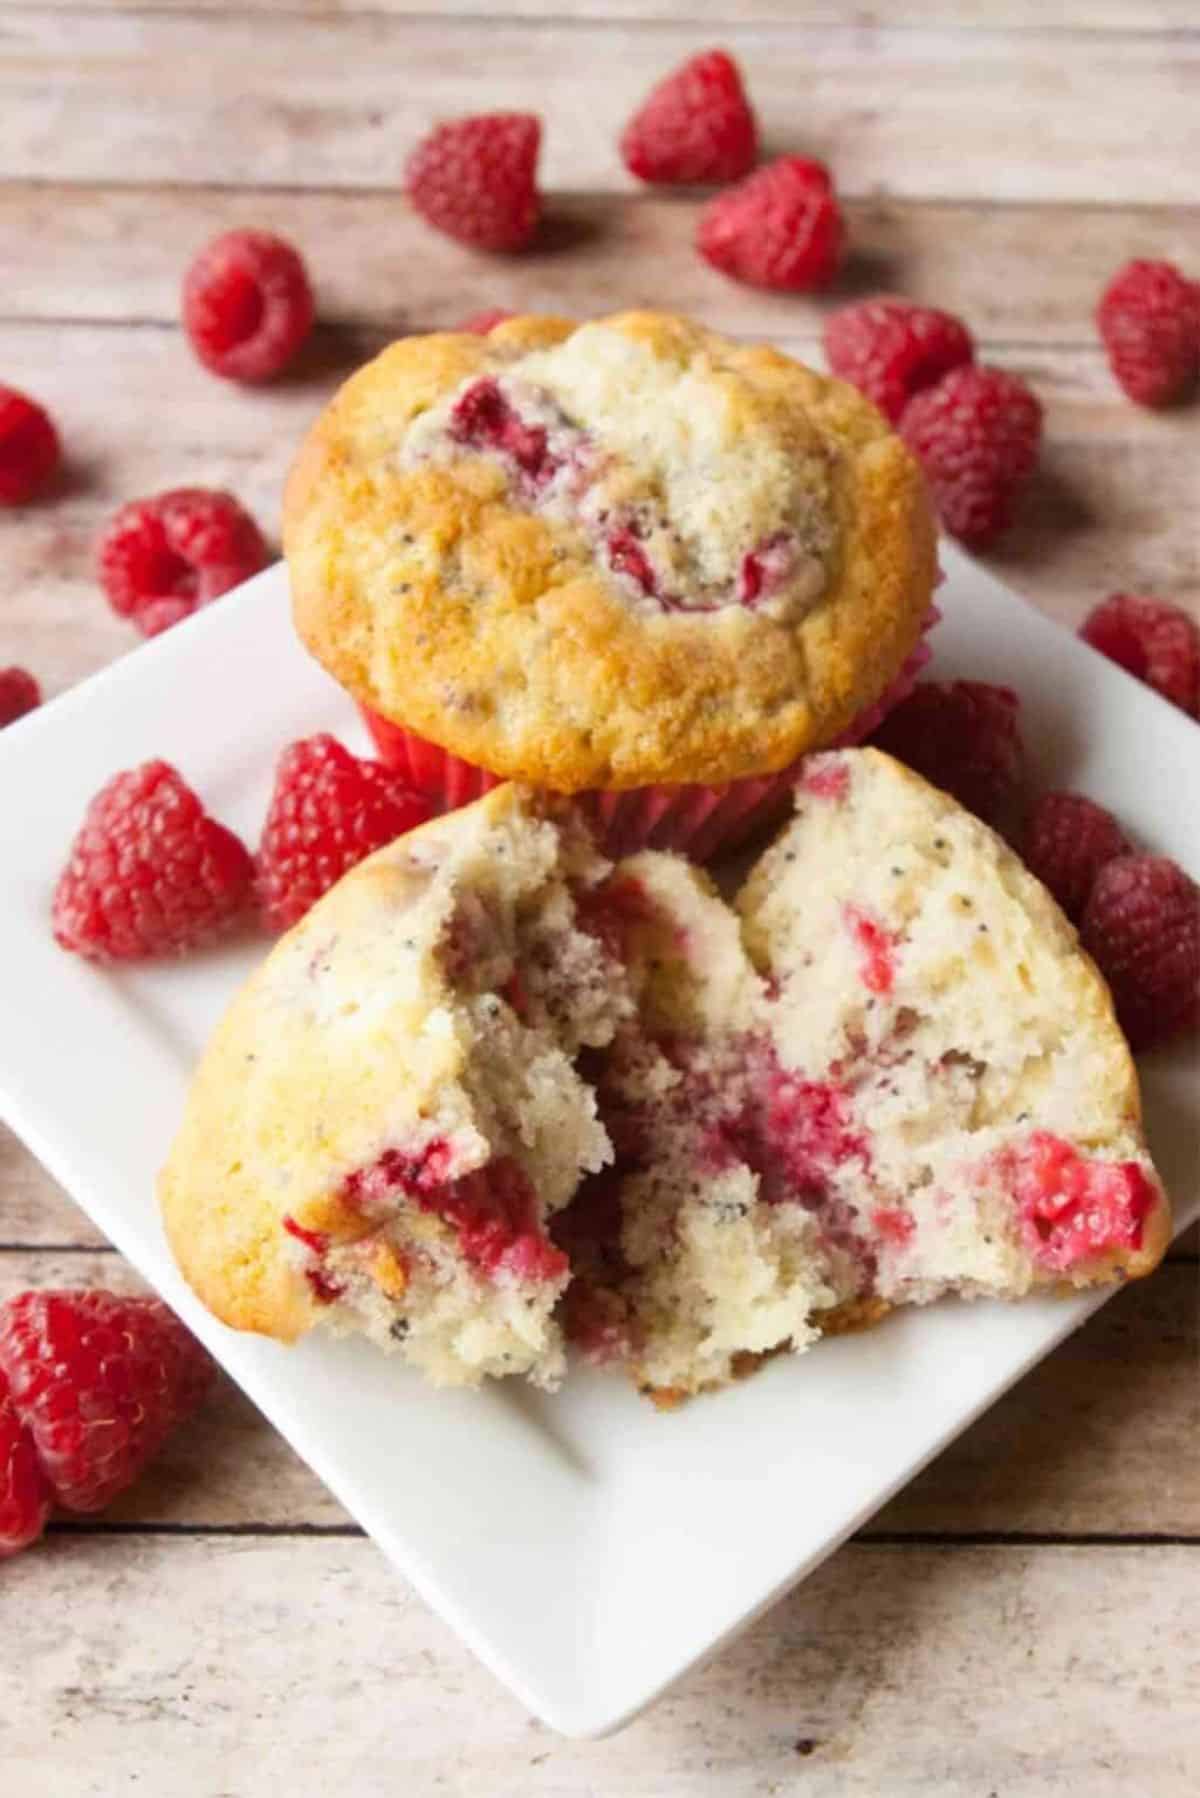 Raspberry Poppy Seed Muffins on a white plate with scattered raspberries around.